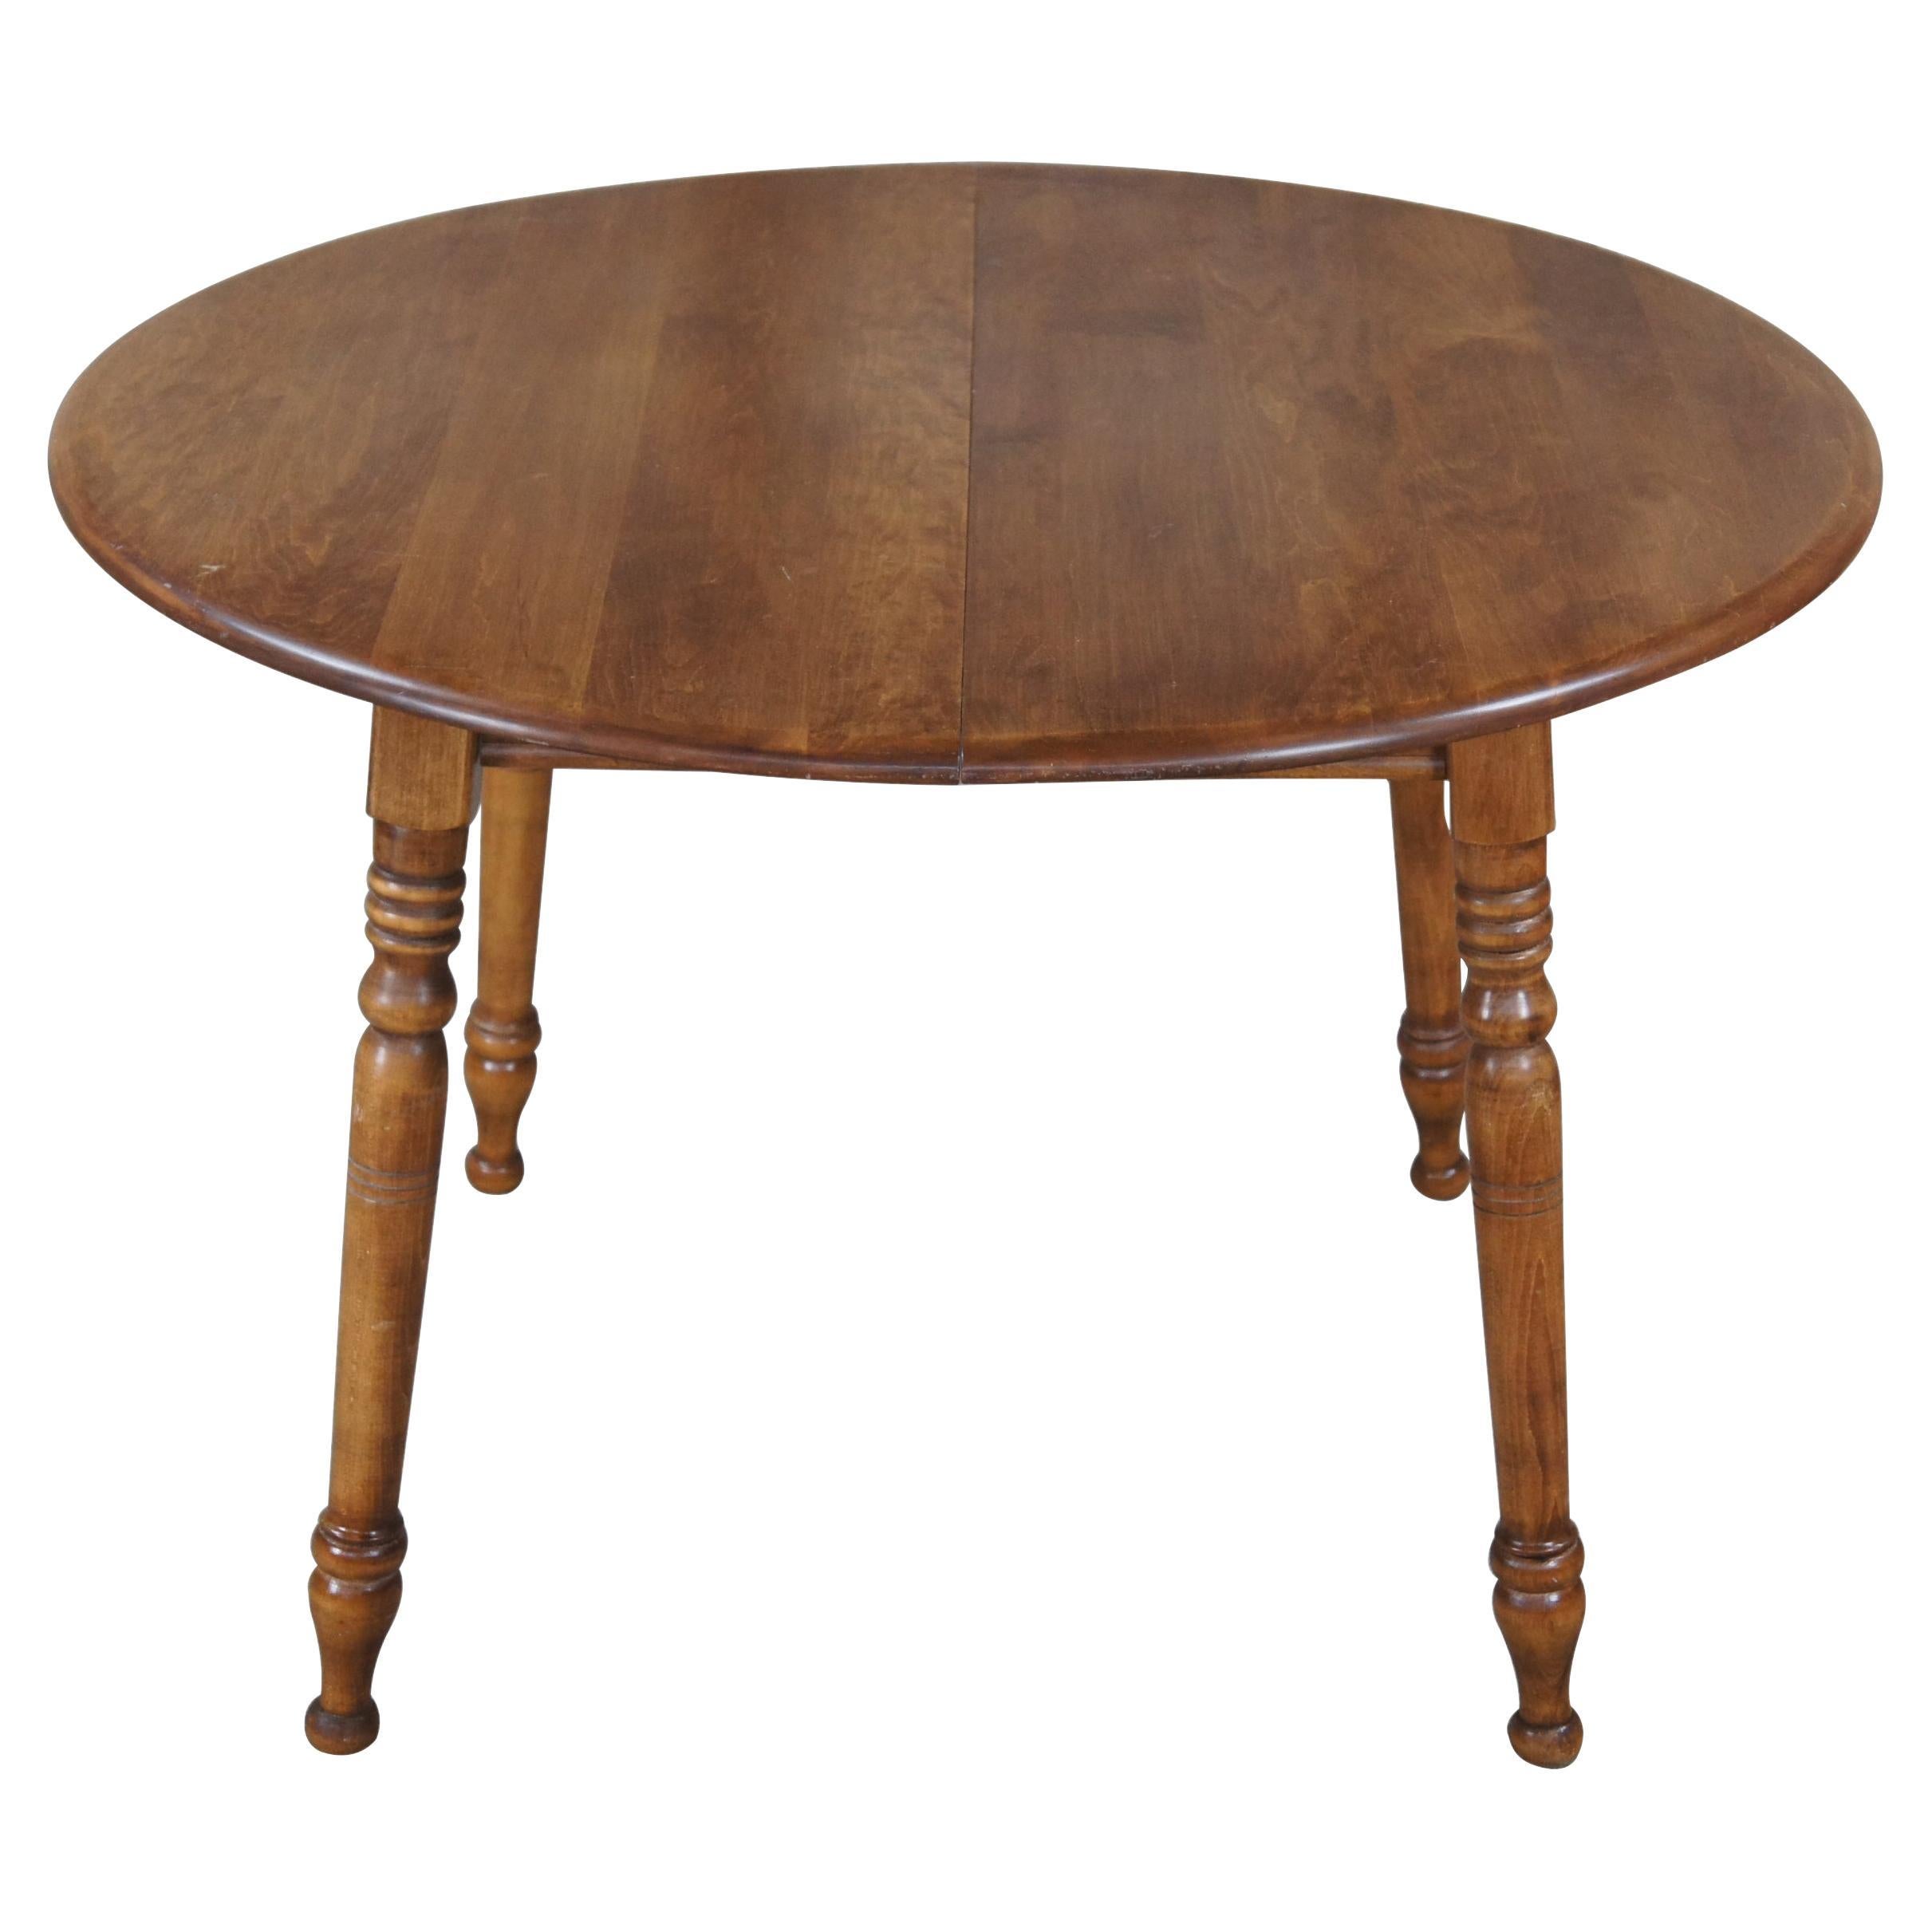 Vintage Early American Style Maple Round Extendable Breakfast Dining Table 66" For Sale